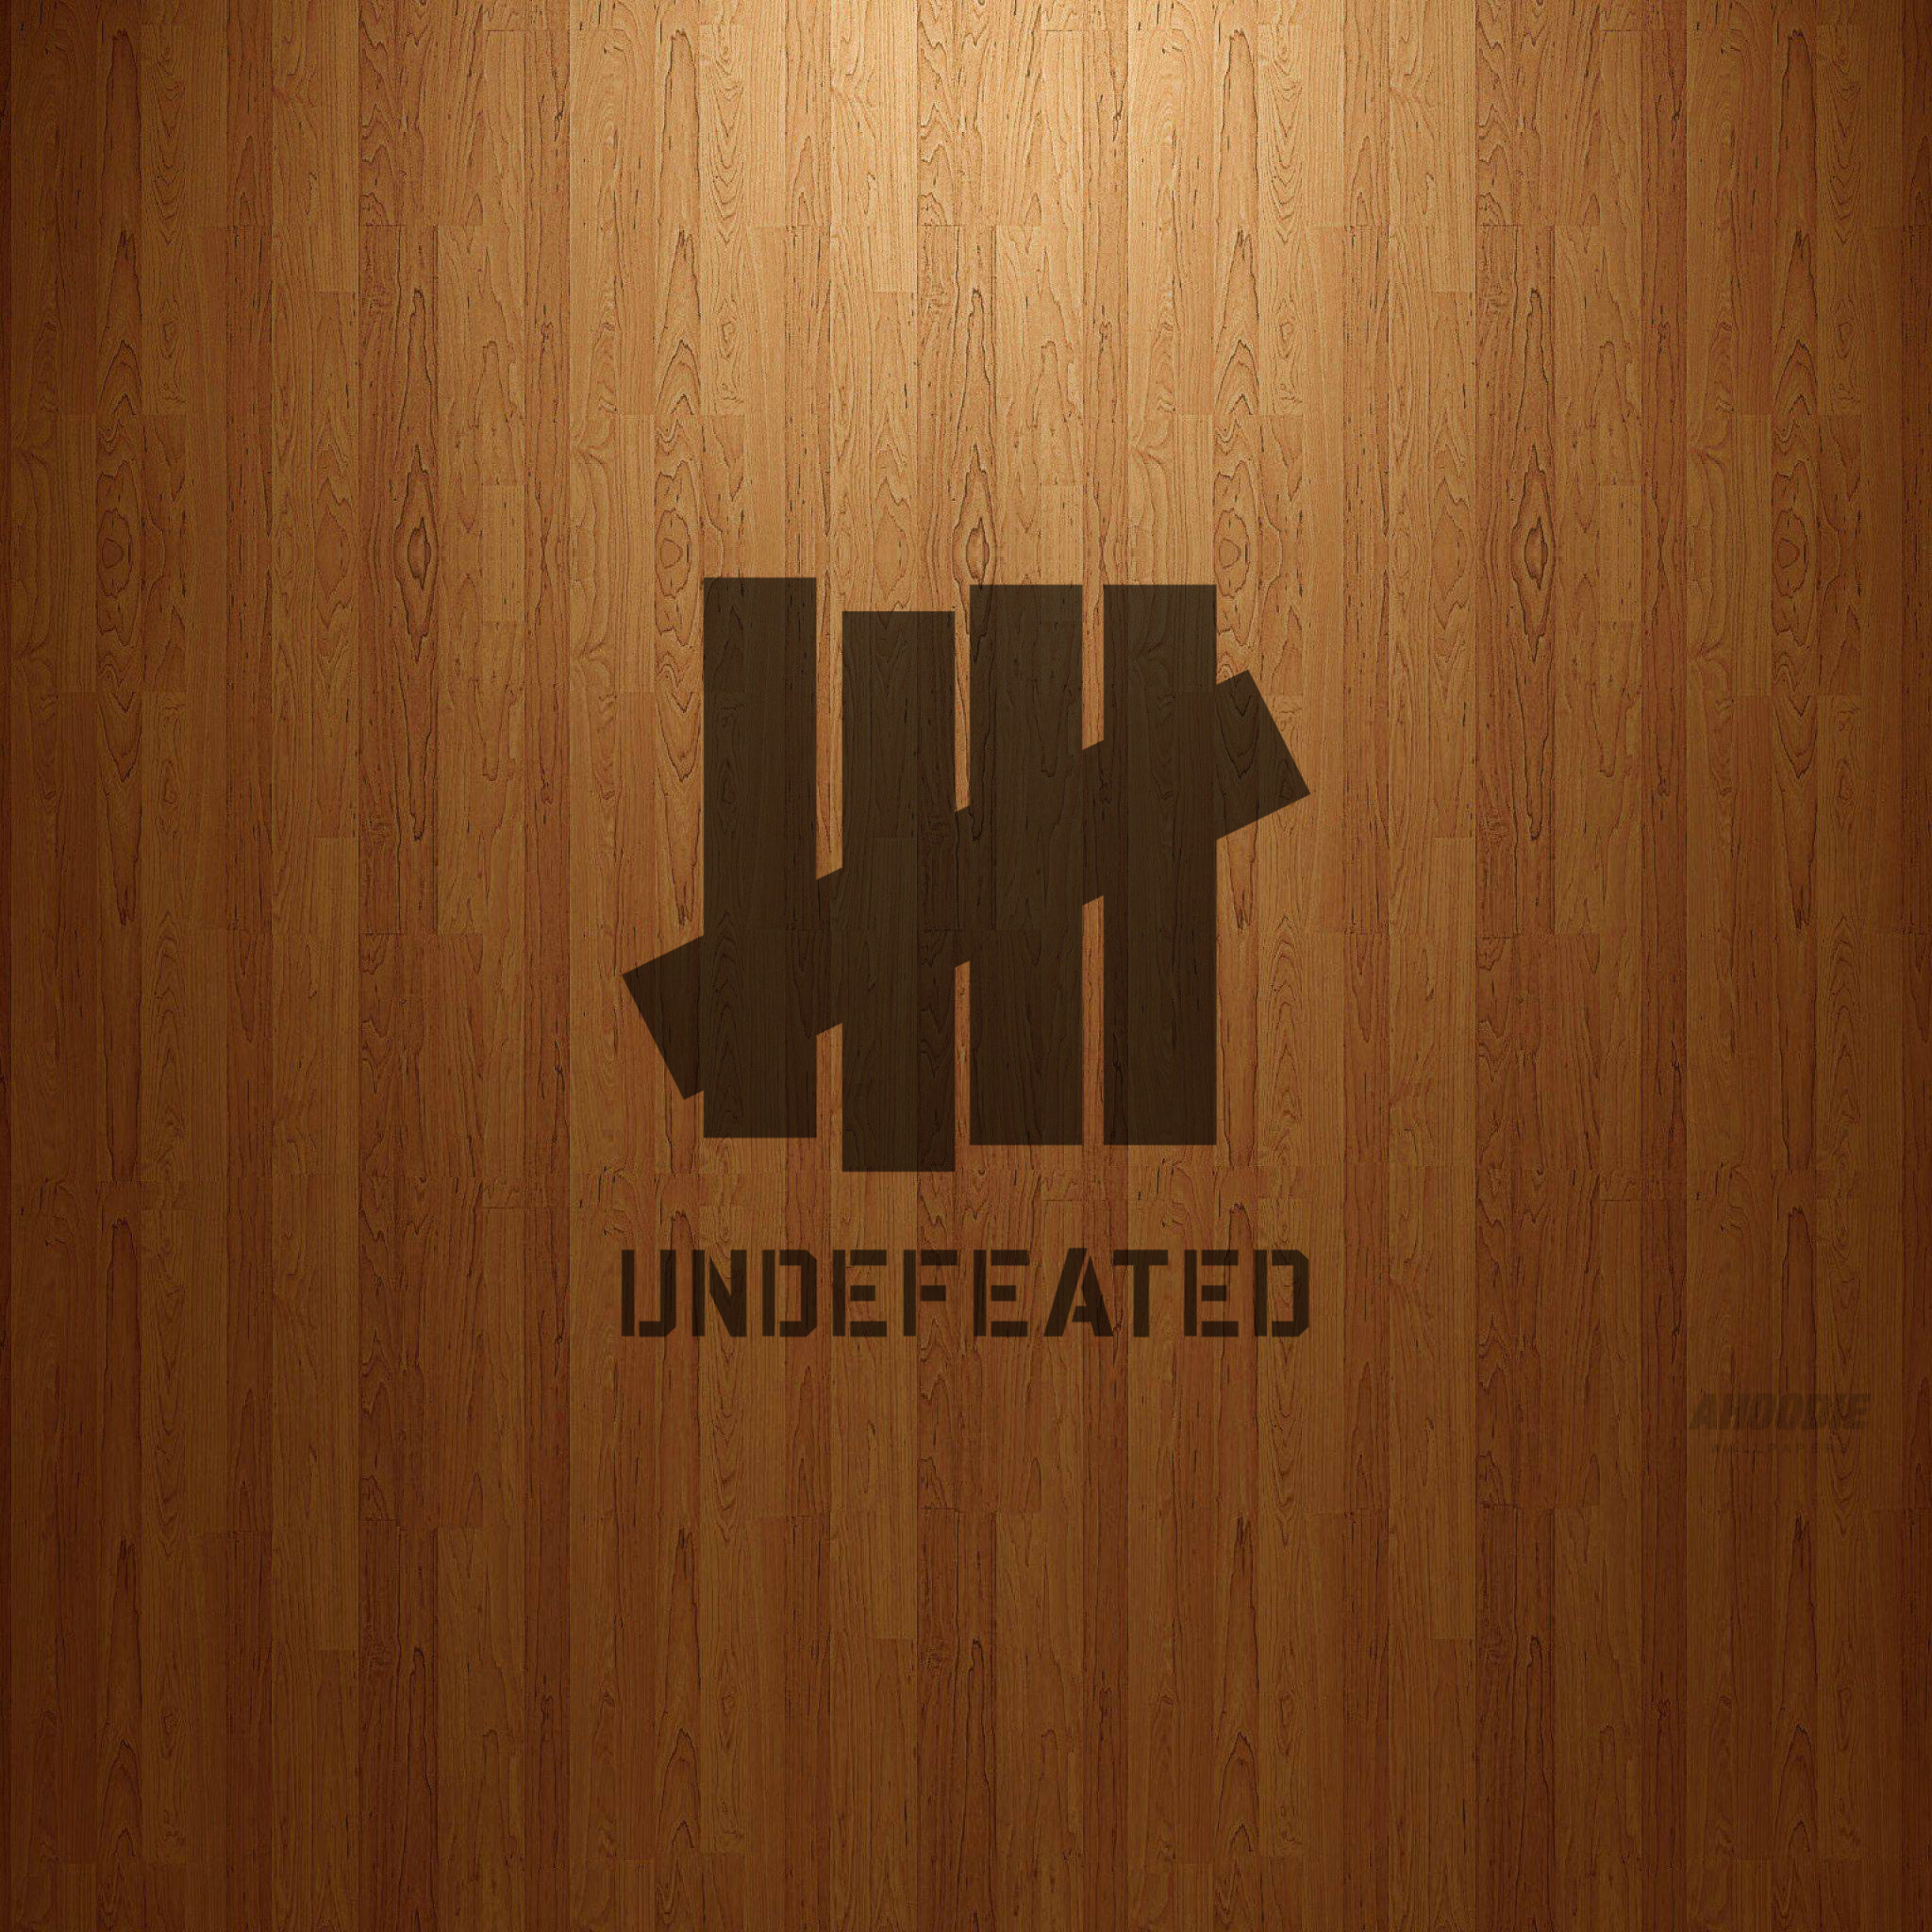 Undefeated Iphone Wallpaper HD Wallpapers on picsfair.com